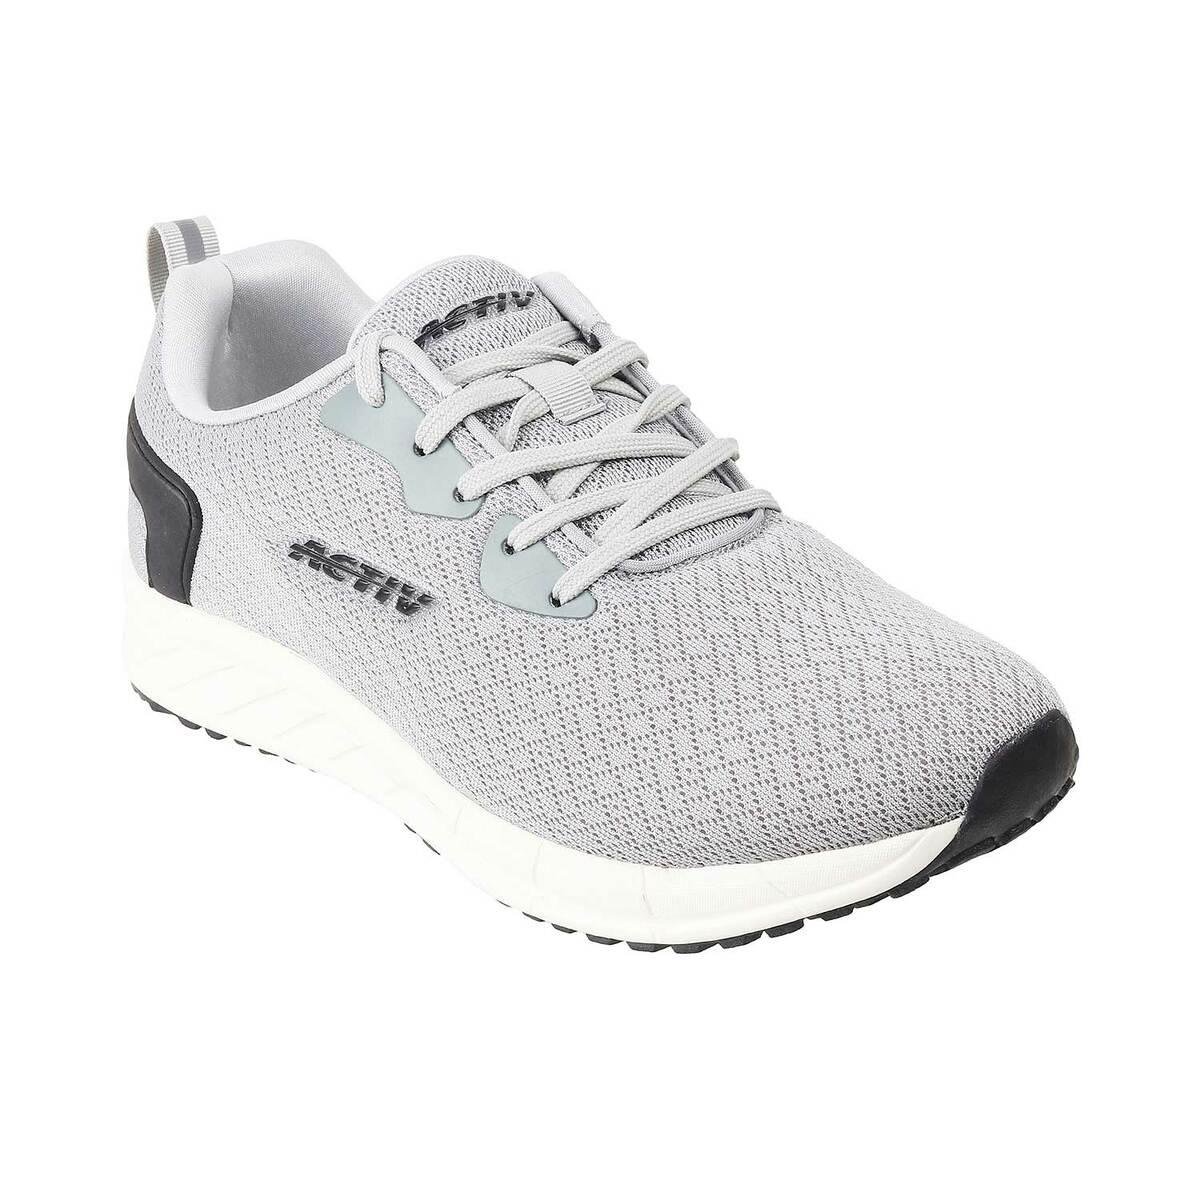 Quite lobby commonplace Buy Activ Grey Sports Sneakers Online Mochi only INR 2699 –Mochi Shoes